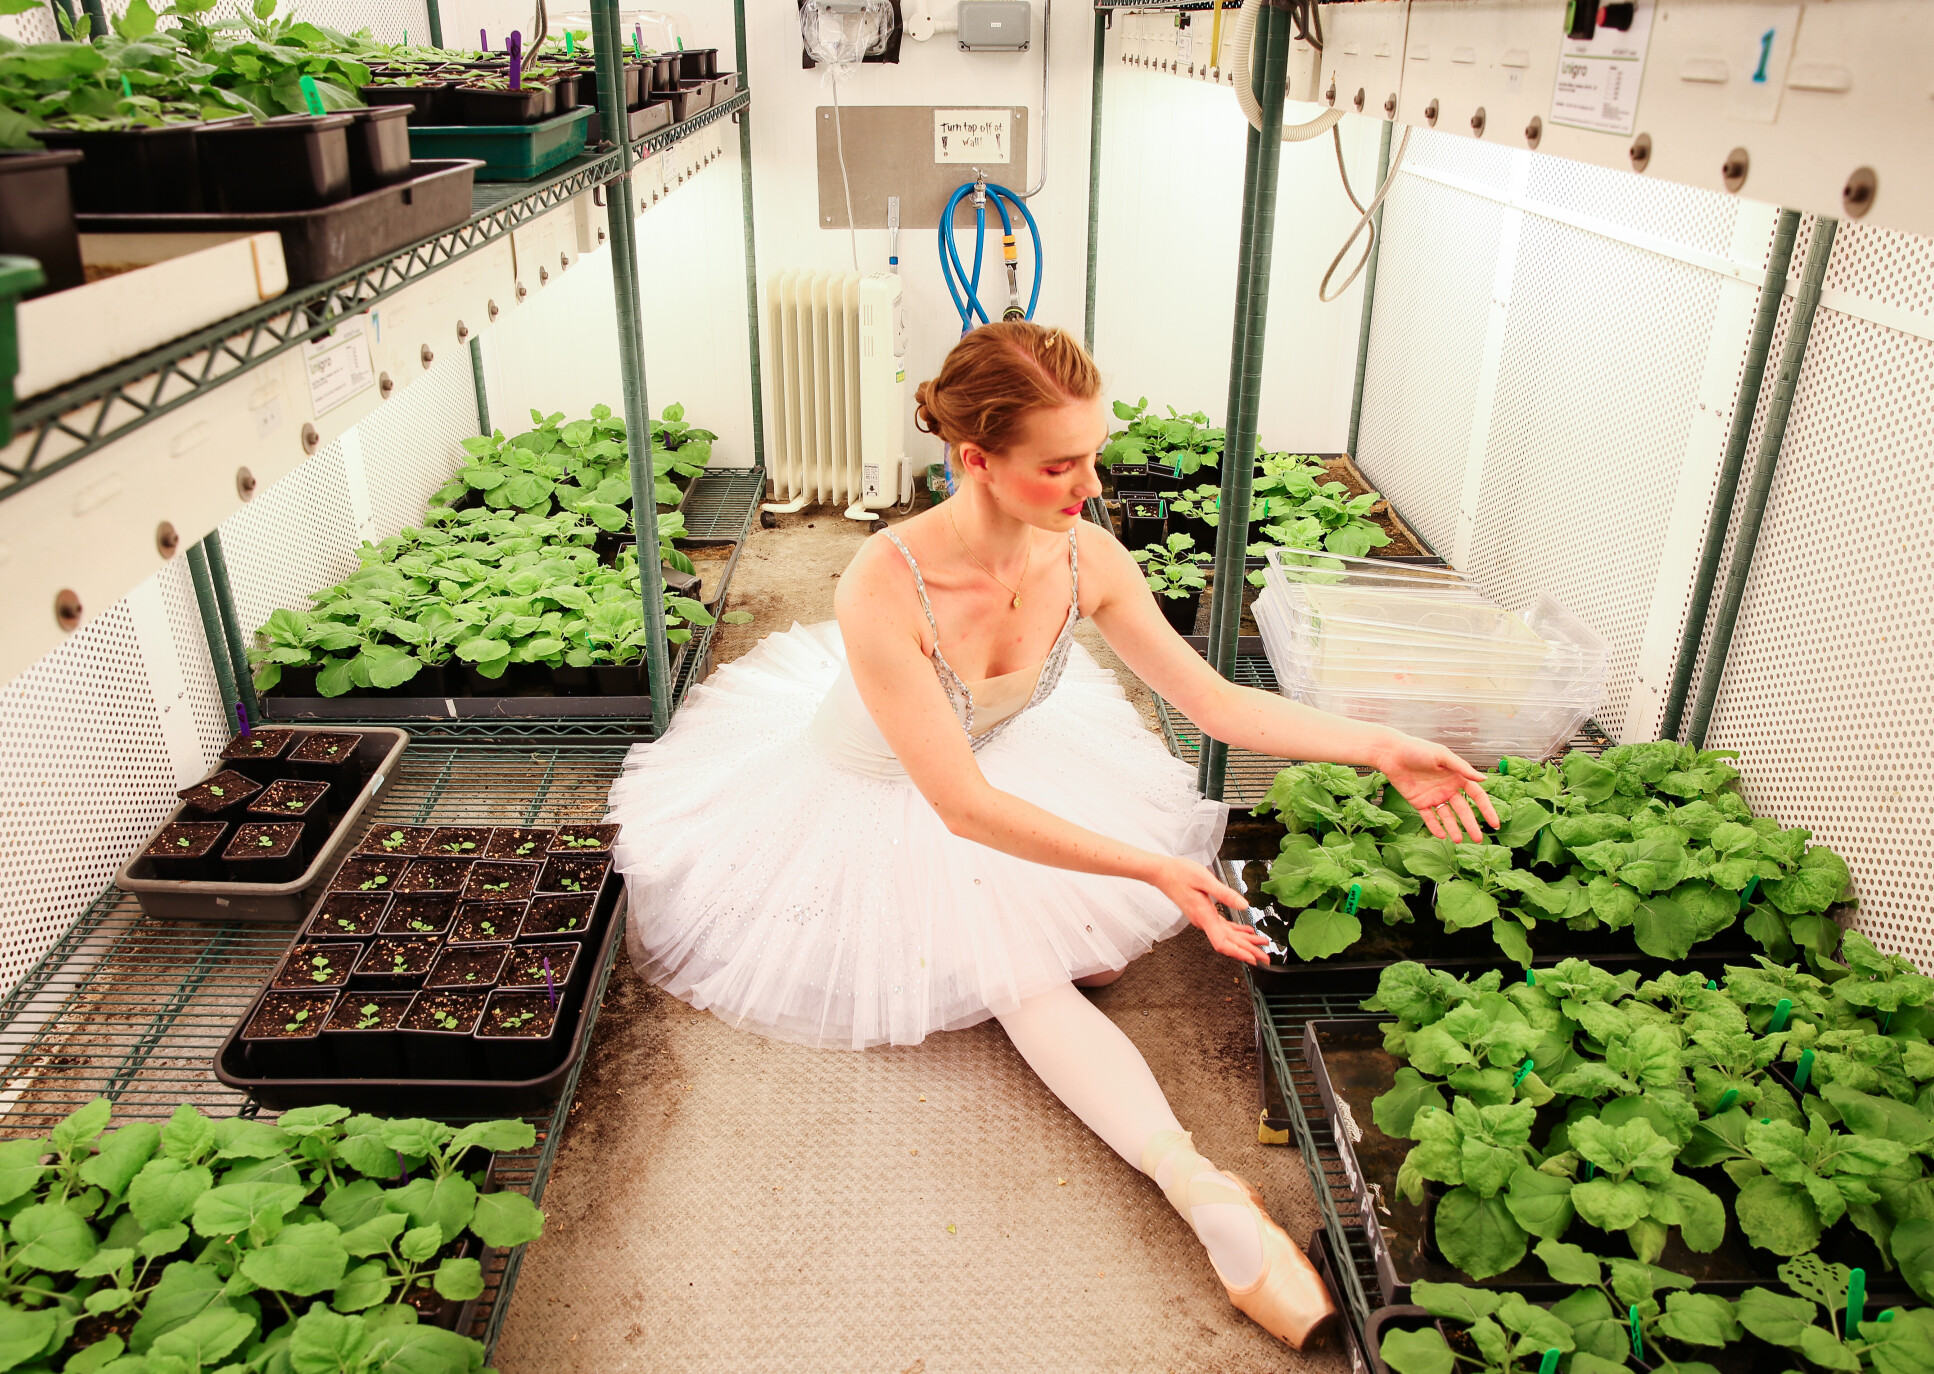  Eleonora Moratto dancing in the plant growth facilities at Imperial